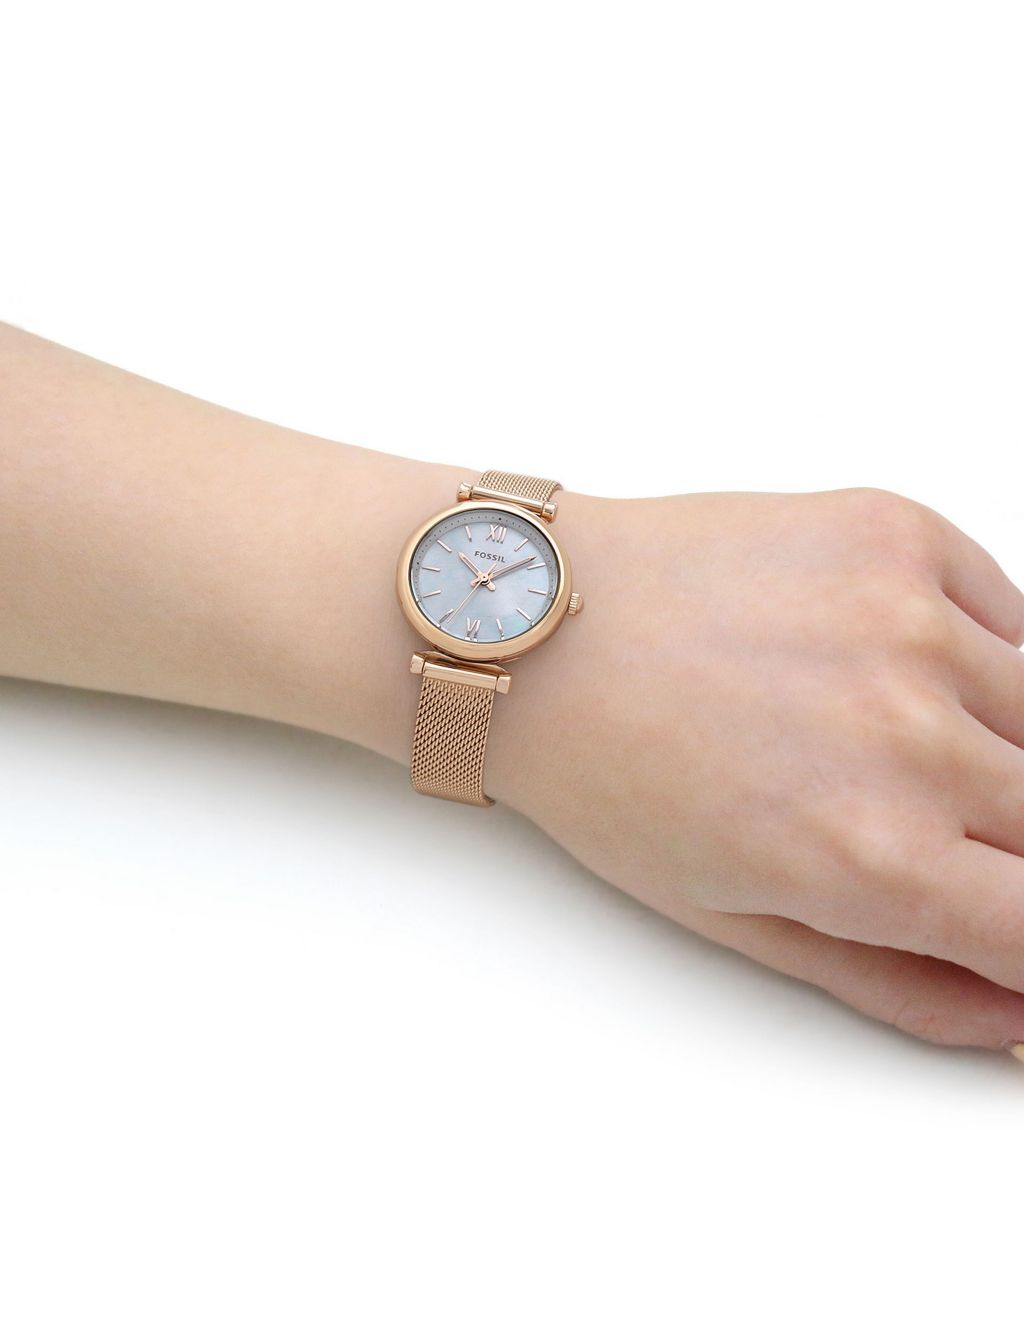 Fossil Carlie Rose Gold Metal Watch image 3